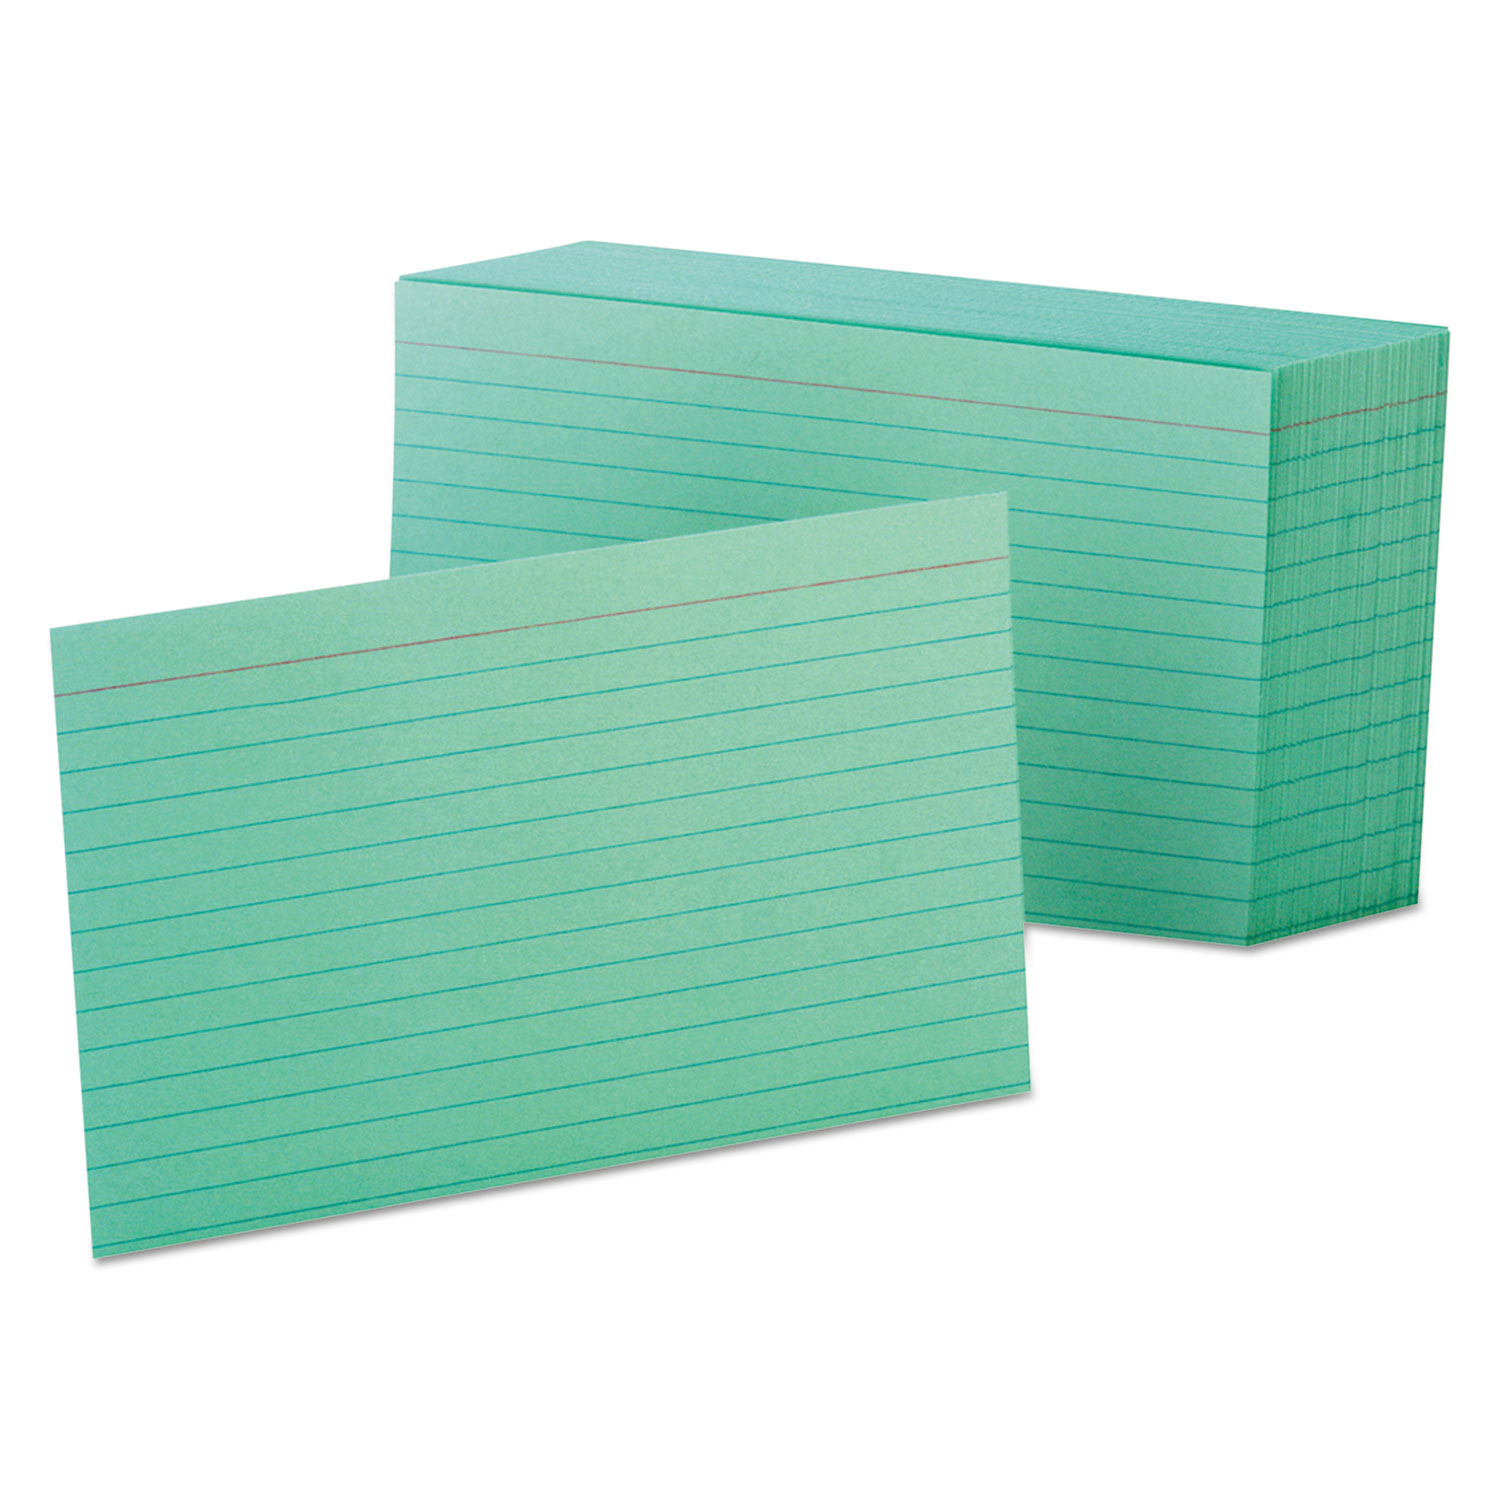  Oxford 7421 GRE Ruled Index Cards, 4 x 6, Green, 100/Pack (OXF7421GRE) 